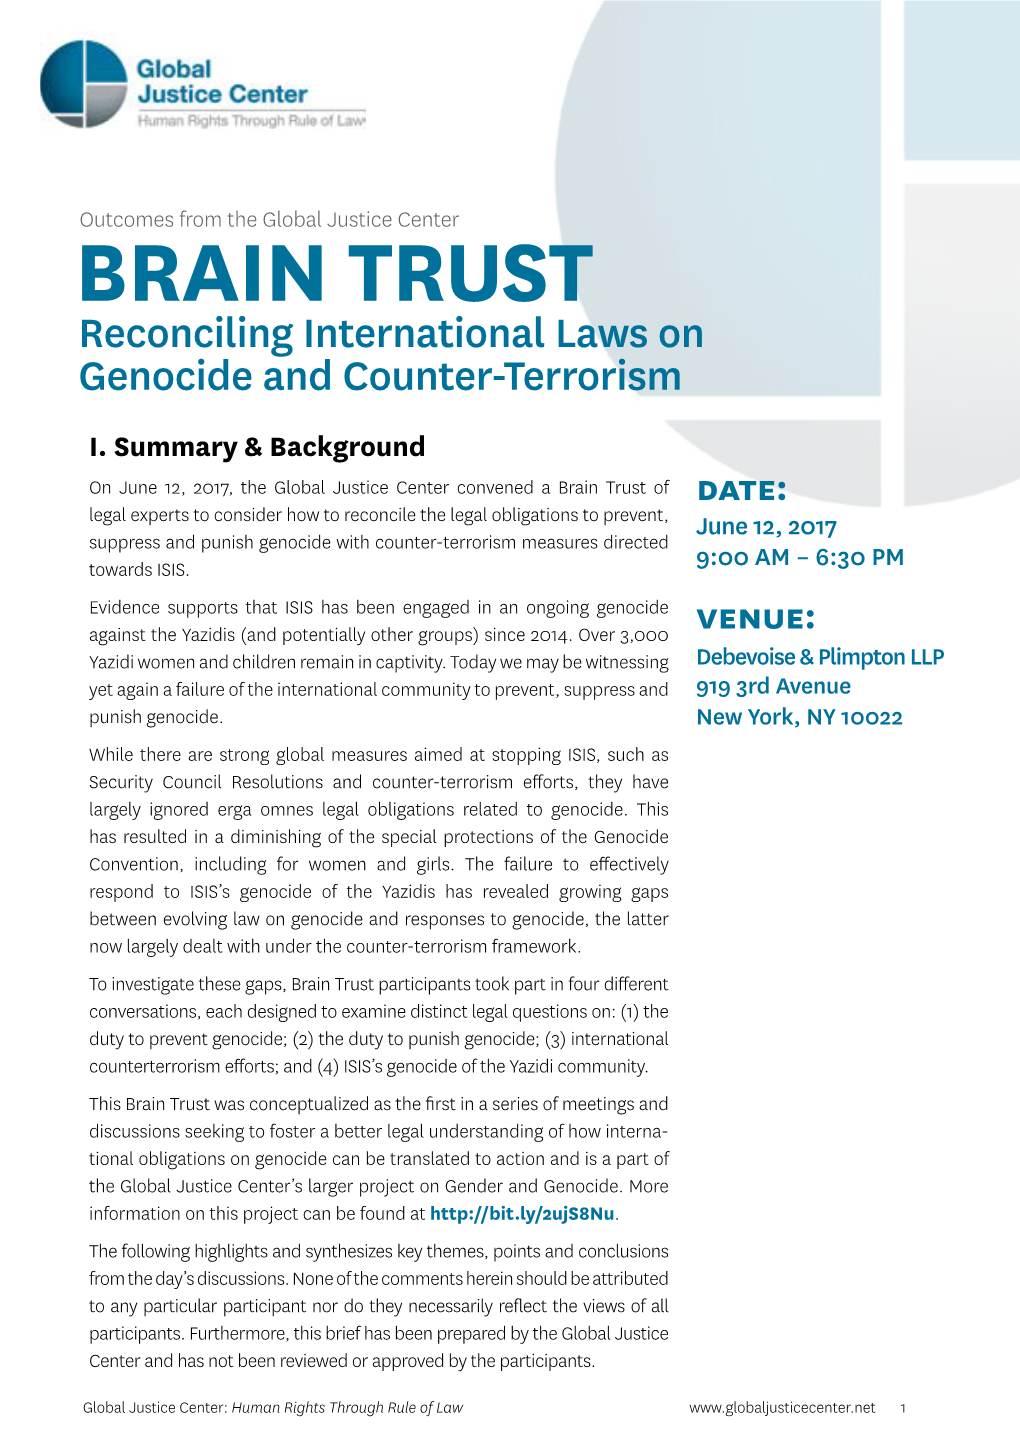 BRAIN TRUST Reconciling International Laws on Genocide and Counter-Terrorism